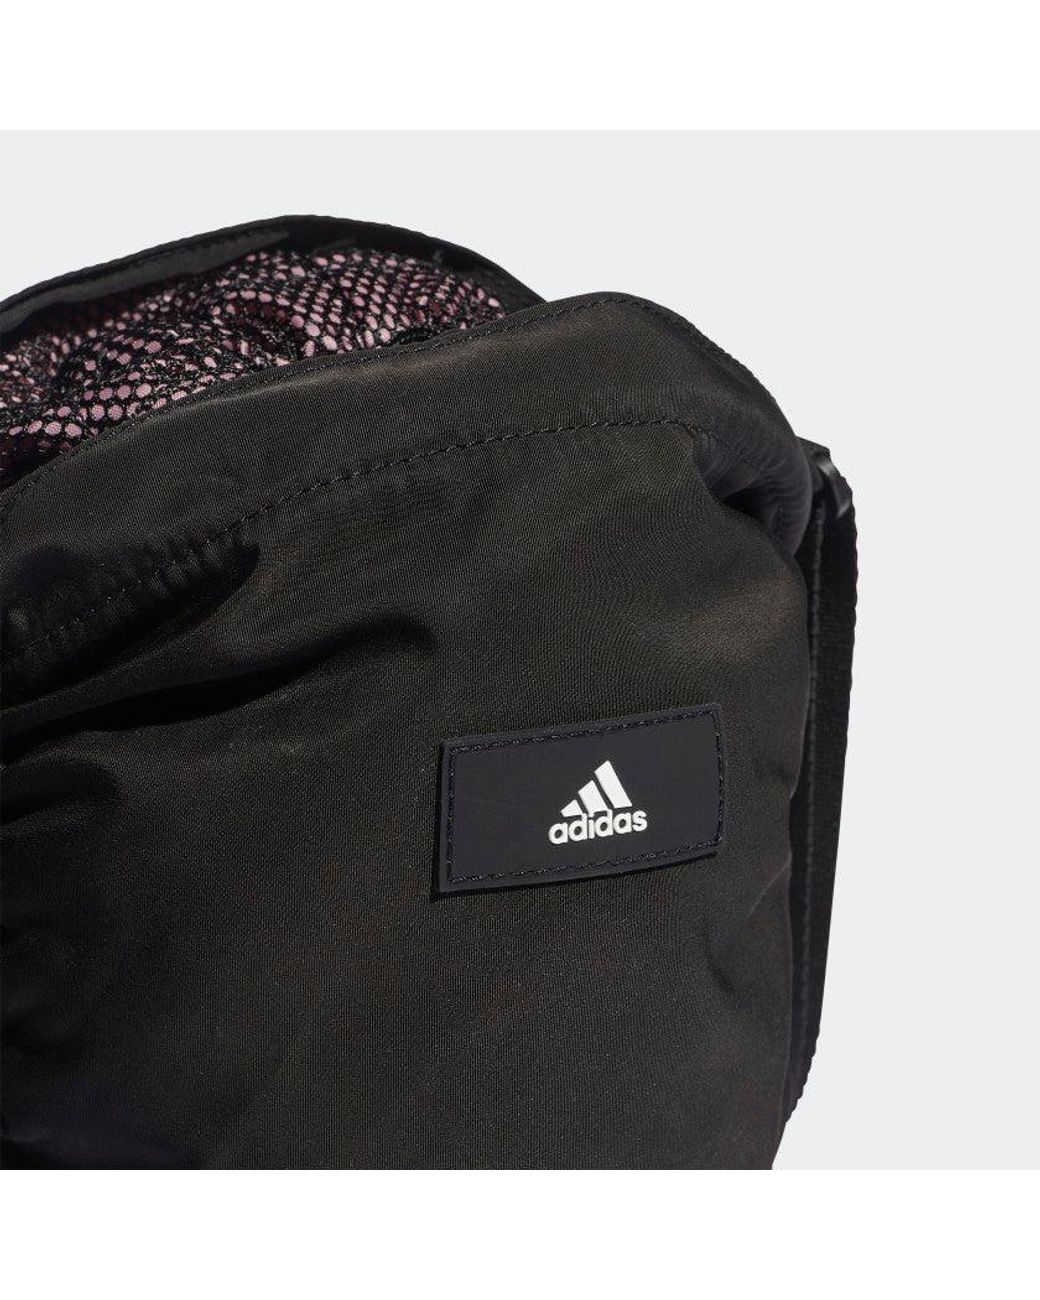 adidas Synthetic Yoga Convertible Mat Sleeve in Black | Lyst